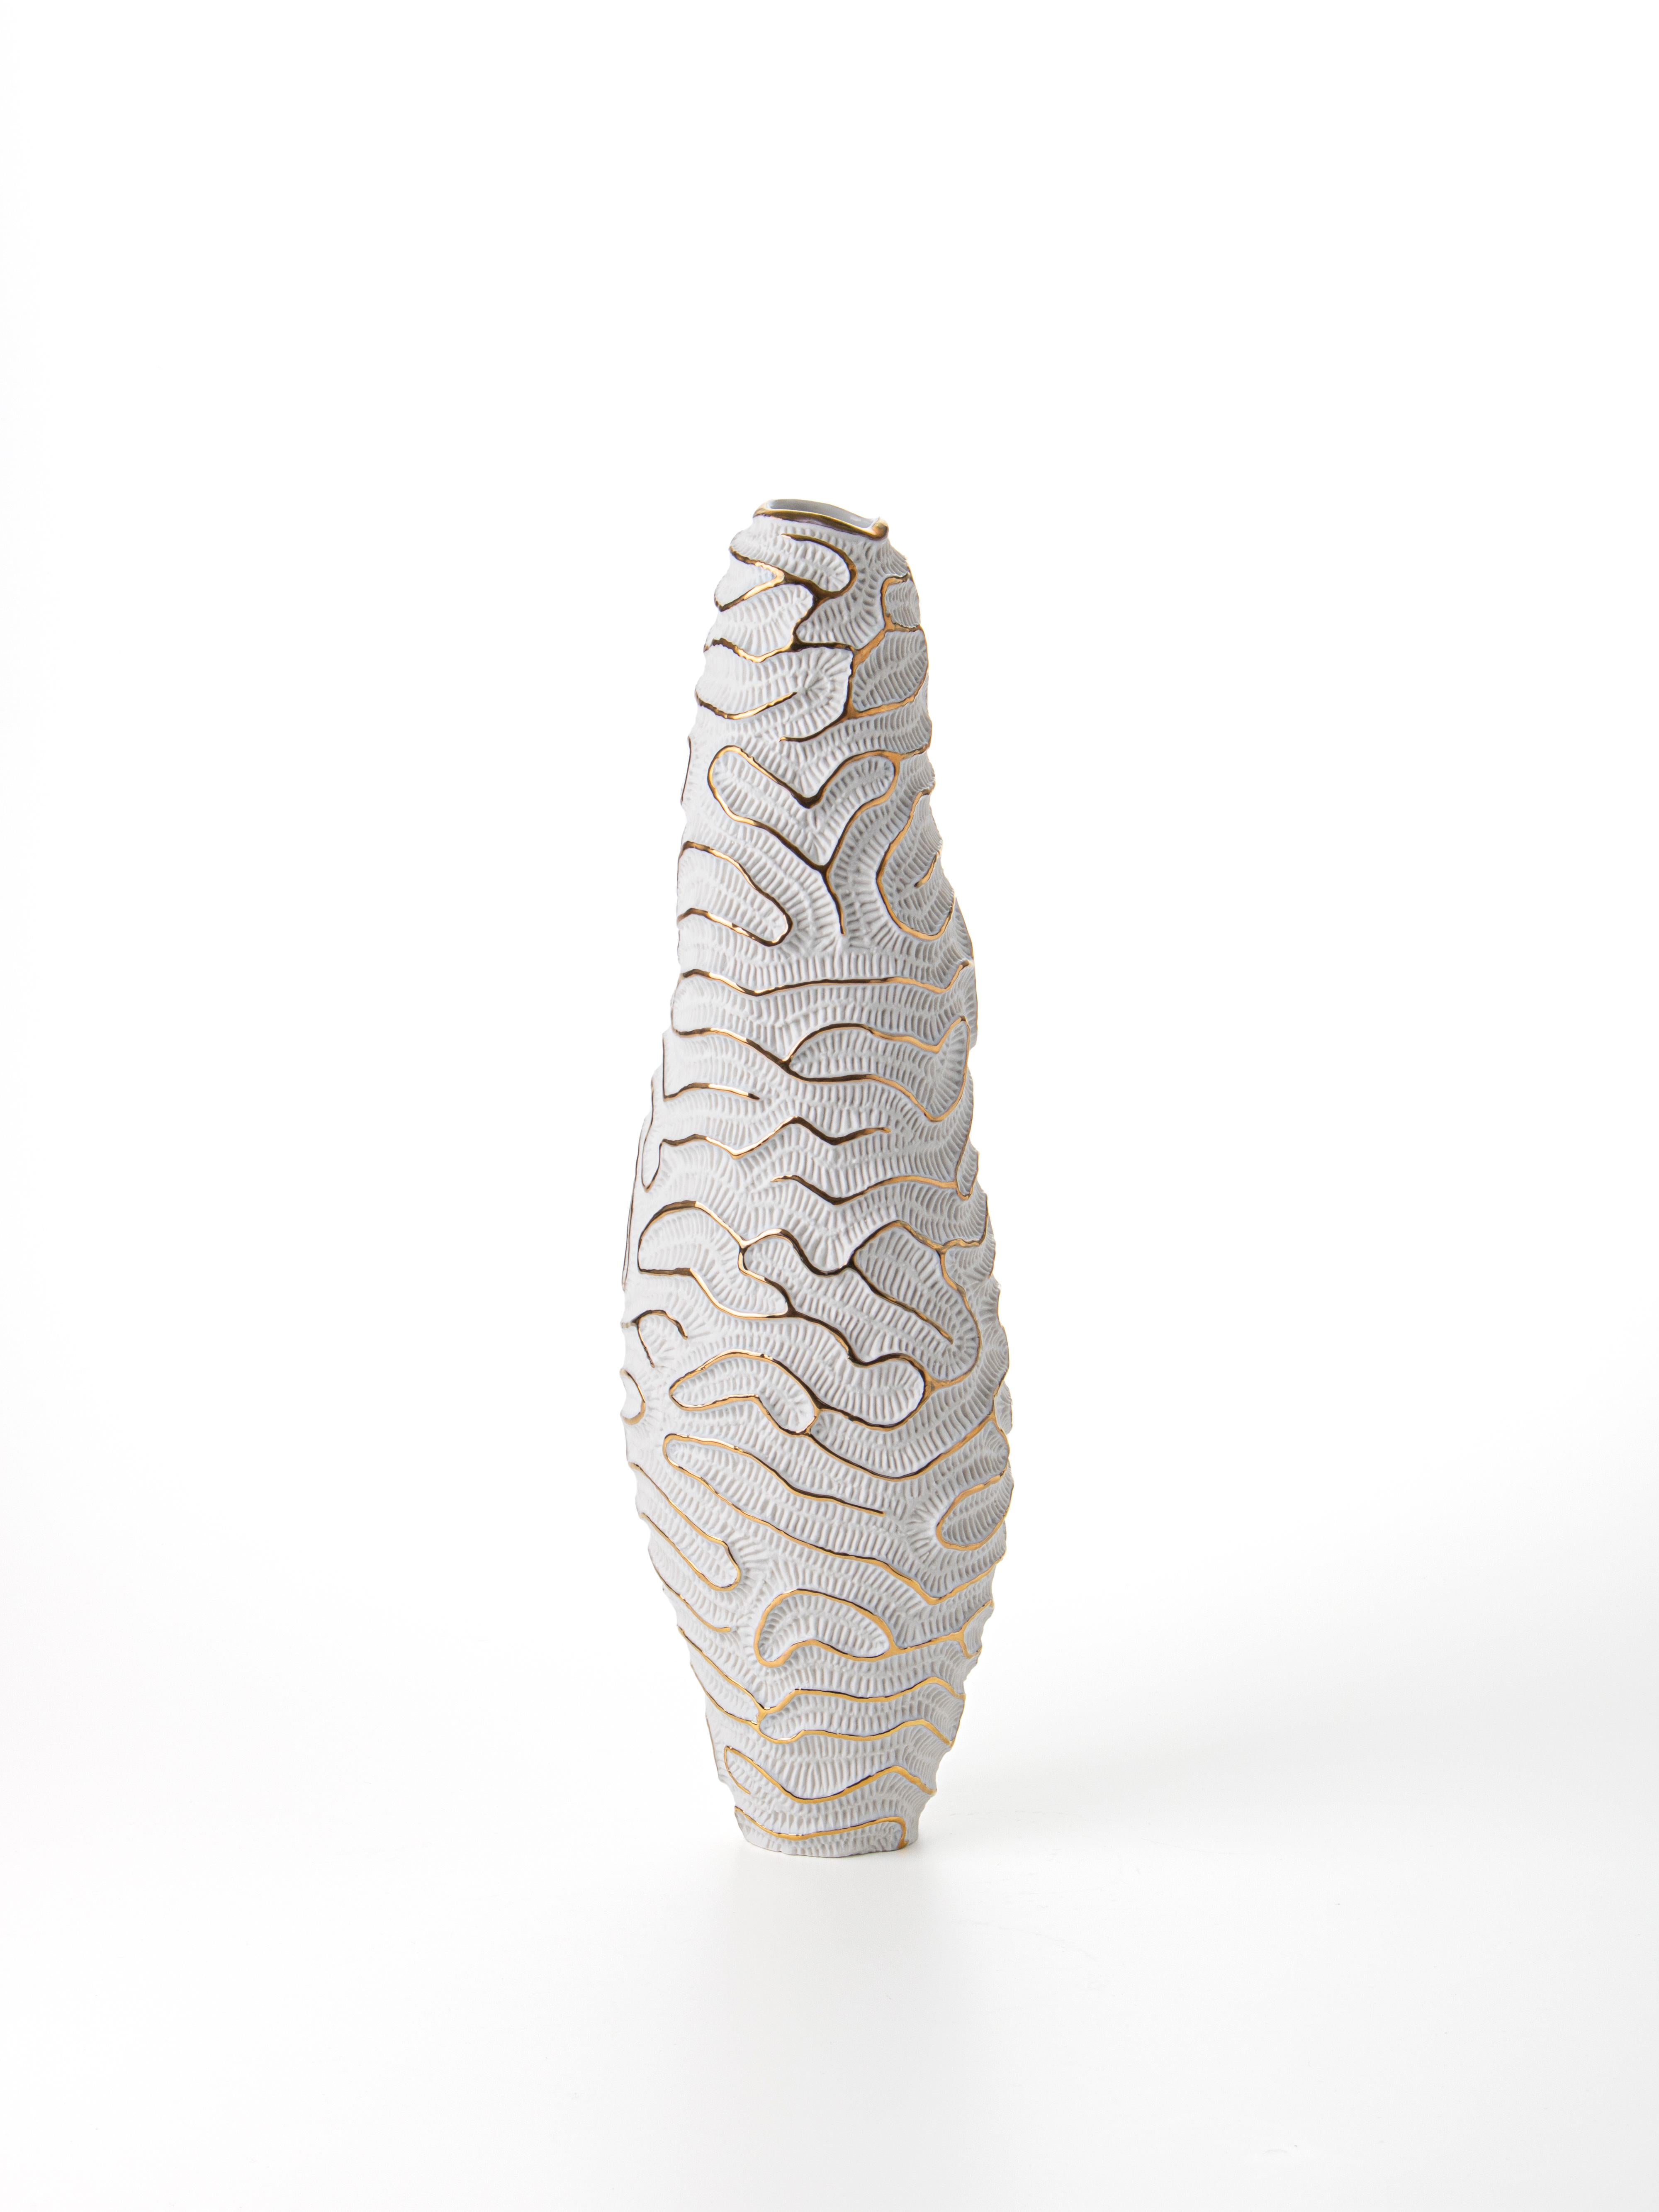 Modern Contemporary Porcelain Vase Gold Slim Sea Fossil texture Ceramic Italy Fos For Sale